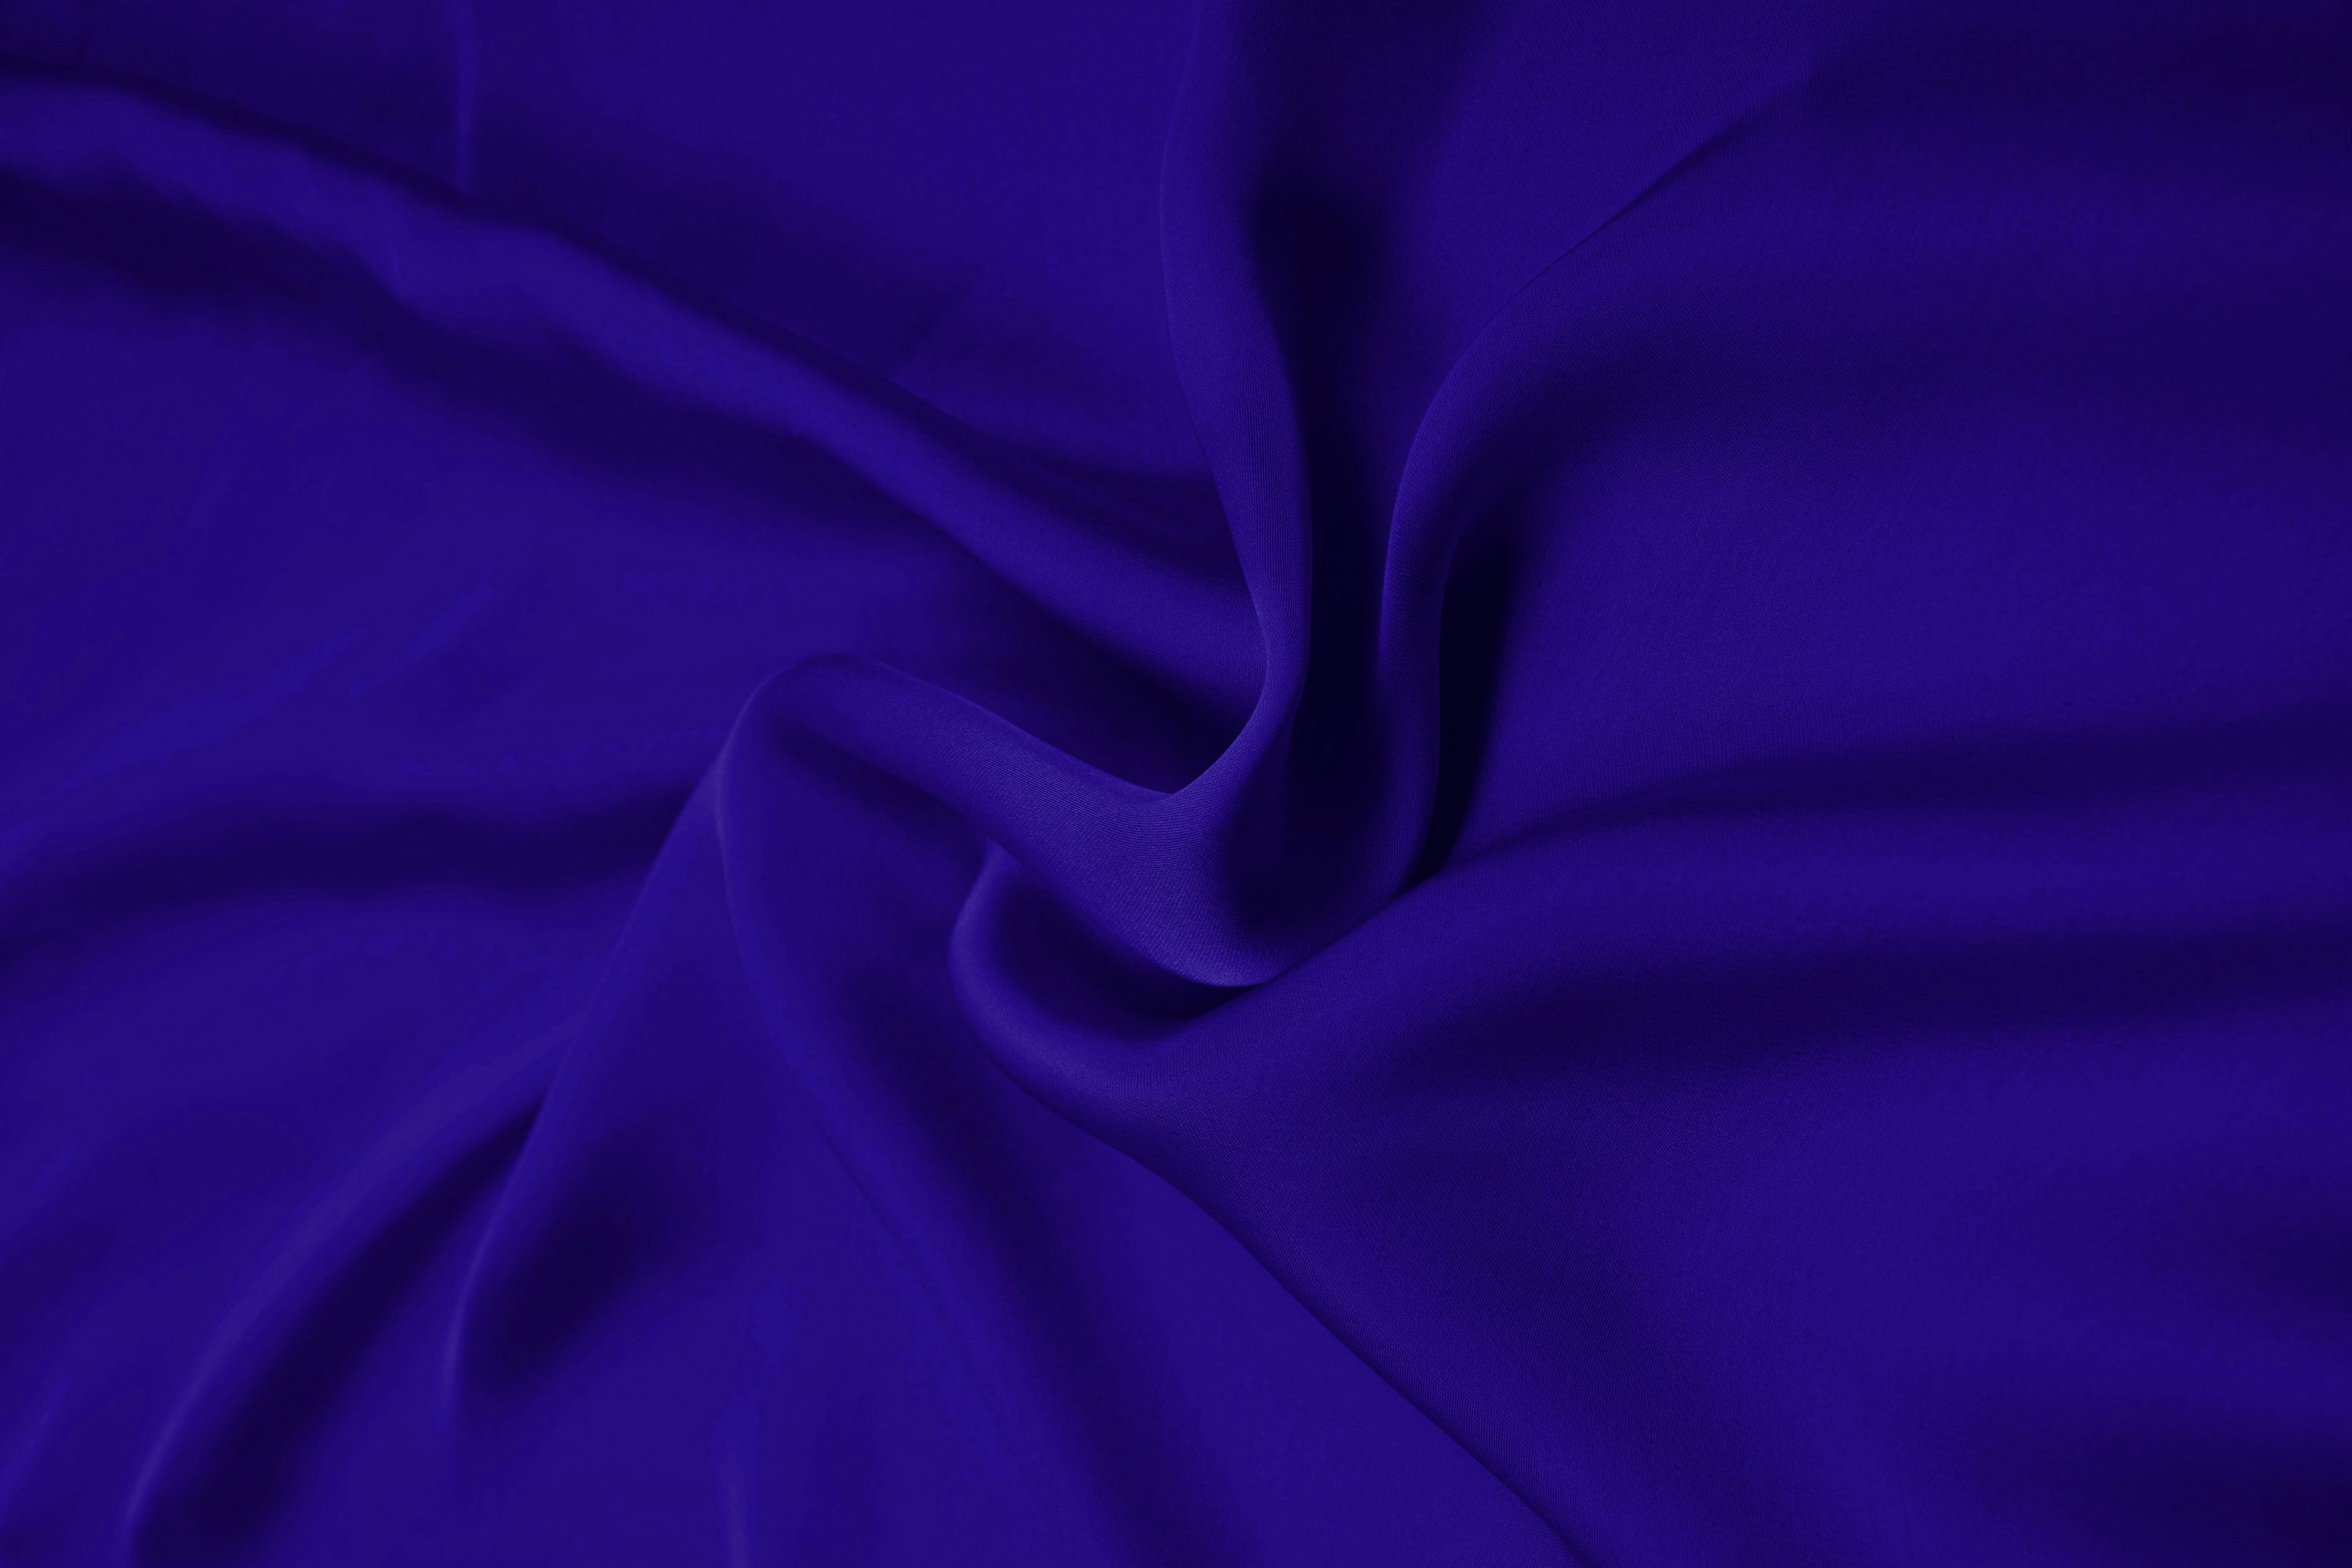 Navy Blue Plain Dyed Satin Georgette Fabric